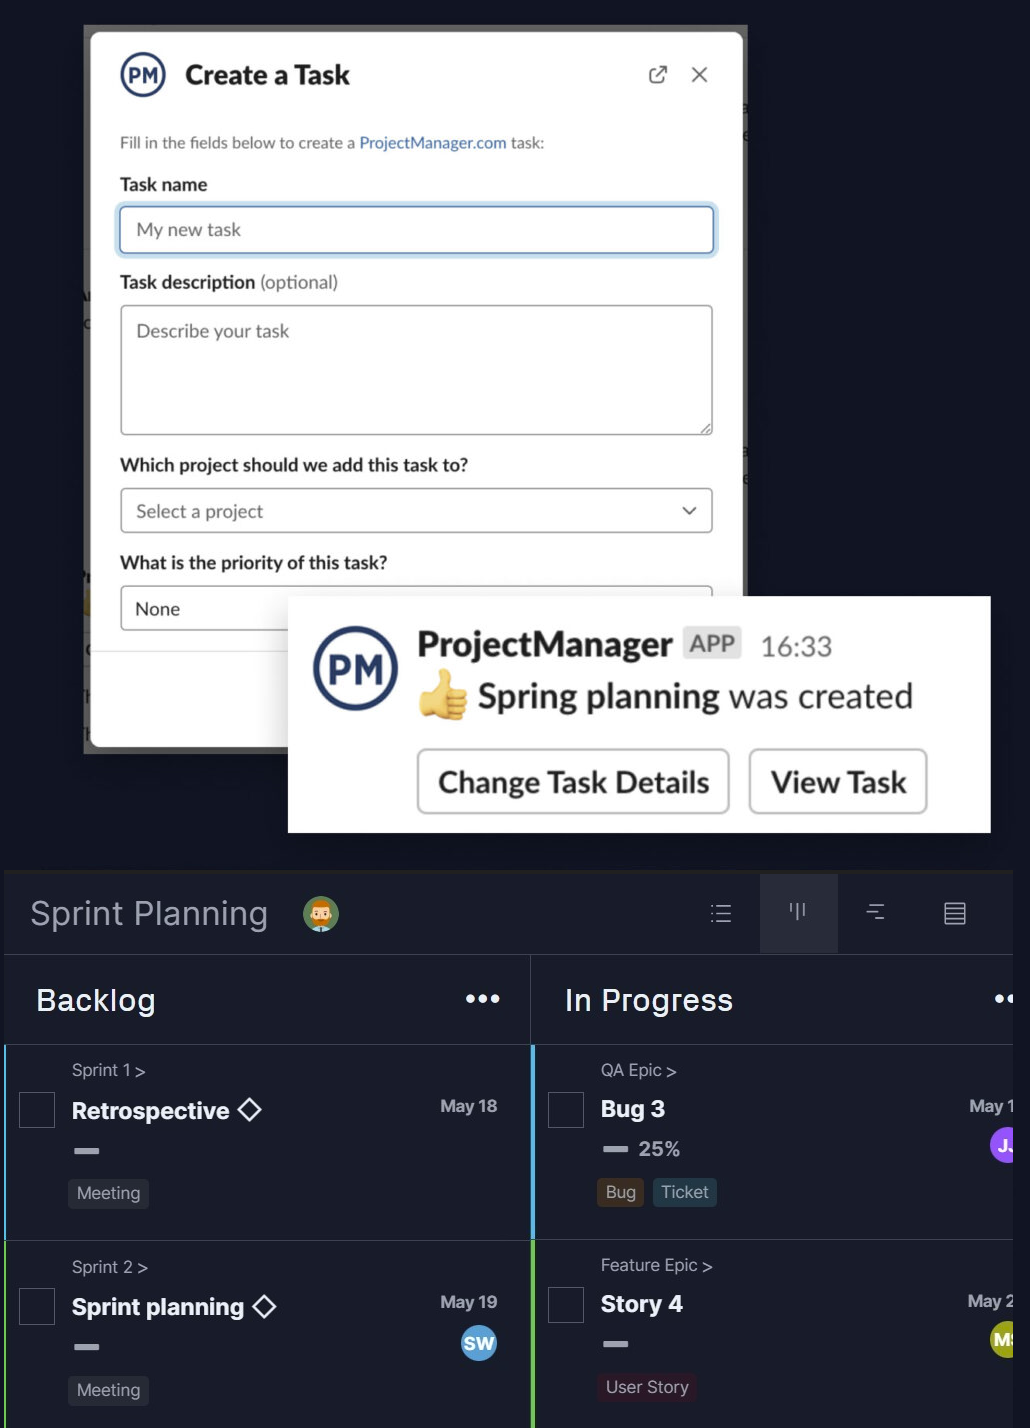 Three screenshots of the ProjectManager and Slack integration, superimposed onto each other. The top screenshot displays the 'Create a Task' screen in Slack. The second is a confirmation message in Slack that the task was created. The third image is that task being displayed in ProjectManager.